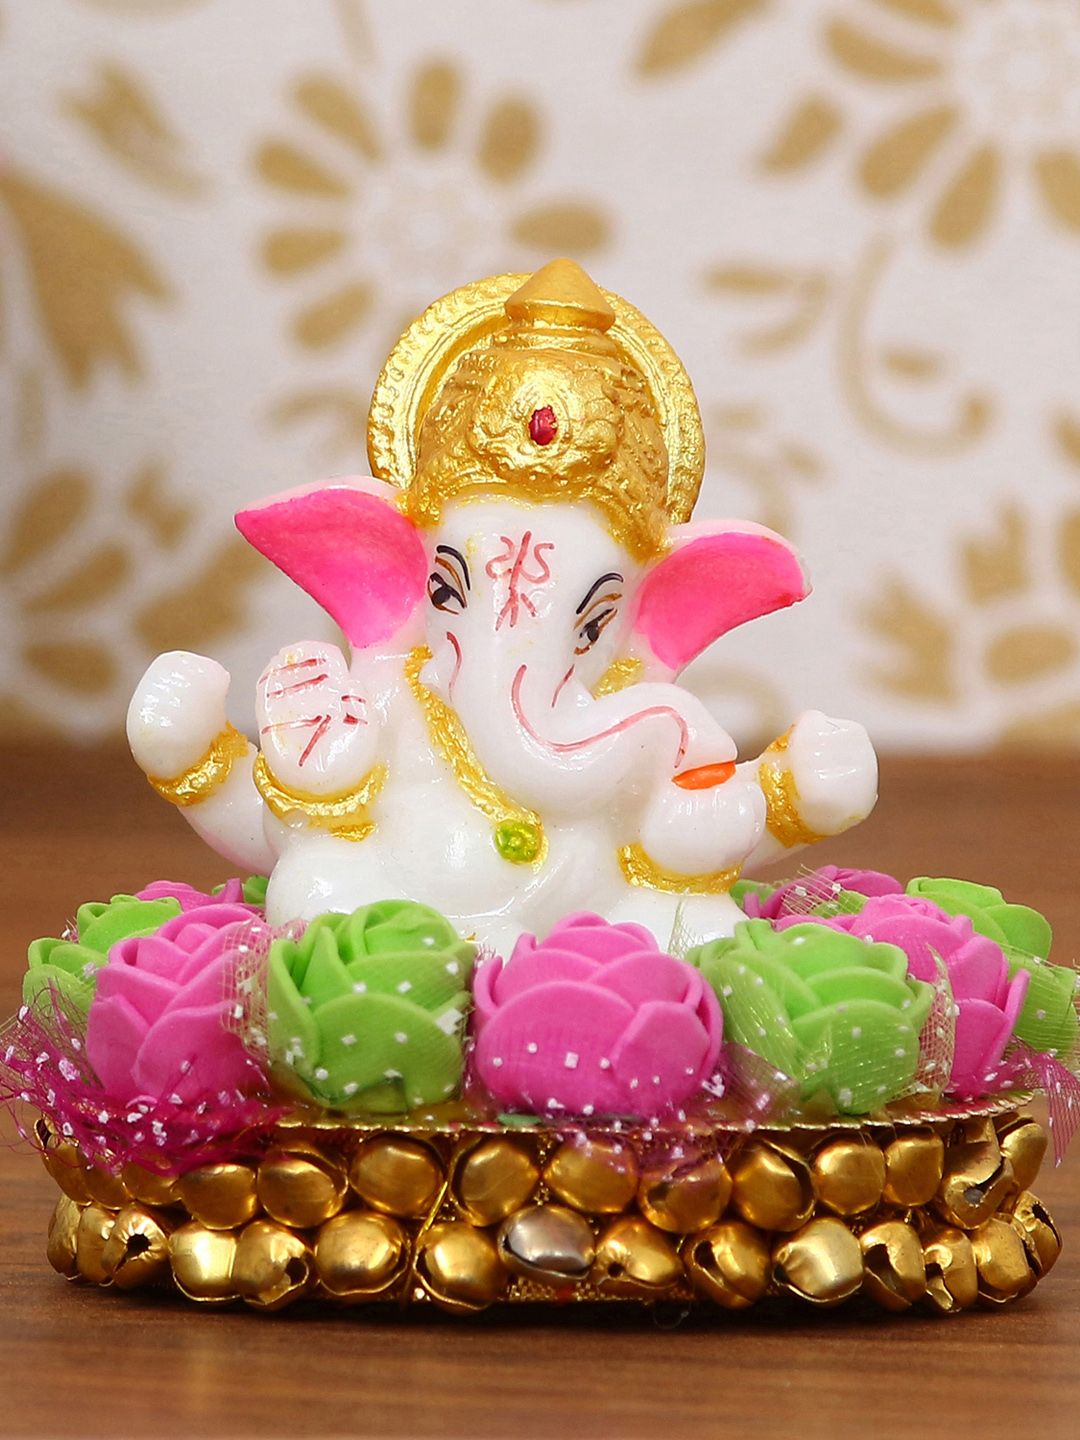 eCraftIndia Pink & White Lord Ganesha Idol On Decorative Handcrafted Plate With Flowers Showpiece Price in India